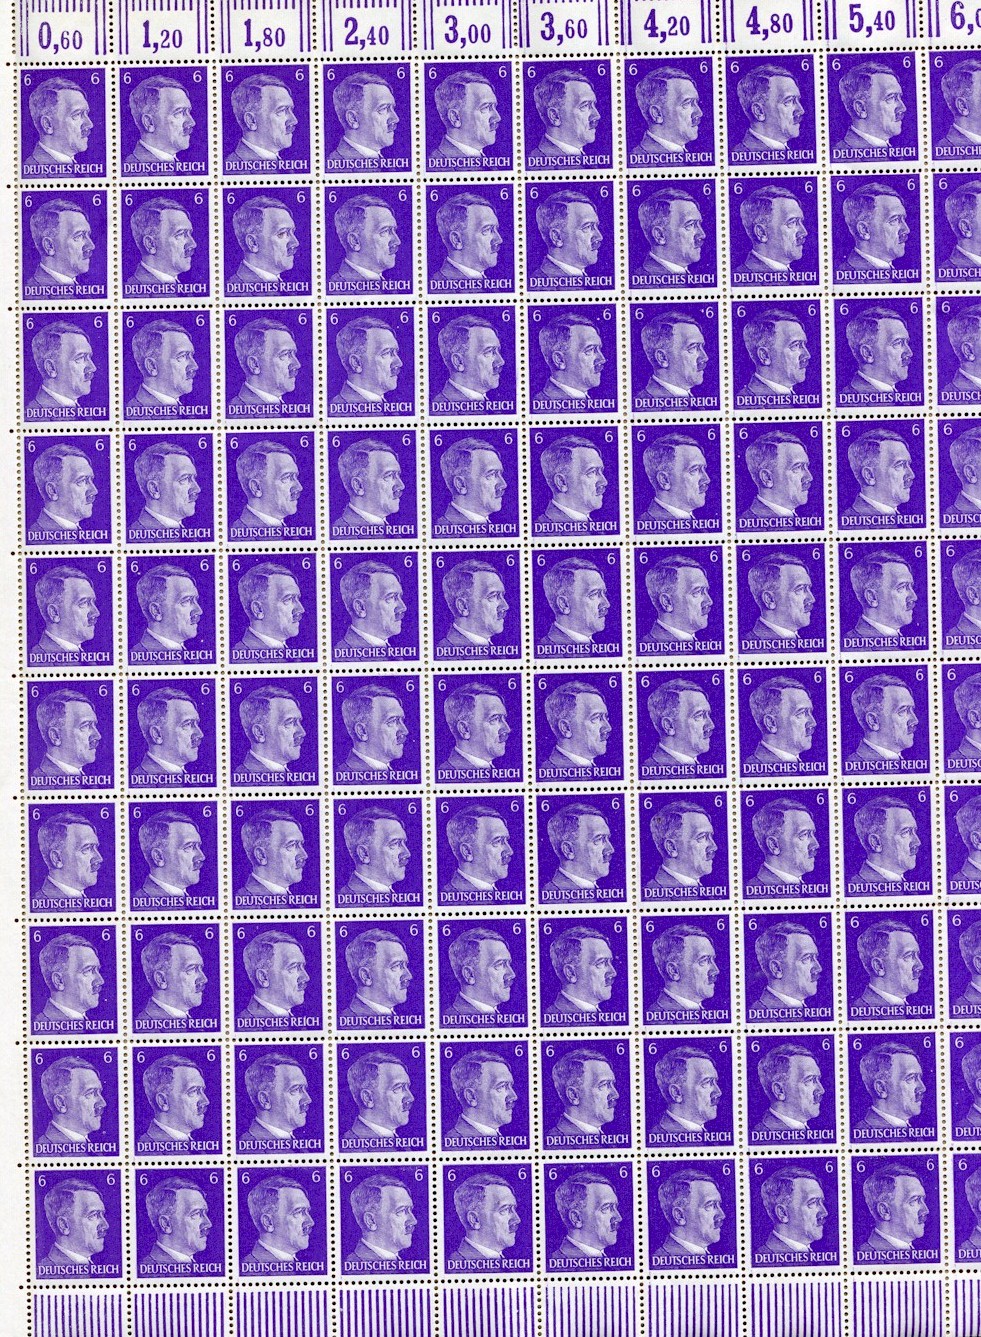 FULL AND COMPLETE GERMAN WWII HITLER HEAD STAMP SHEET OF 100 STAMPS 6 RPF VALUE. FULL GUM